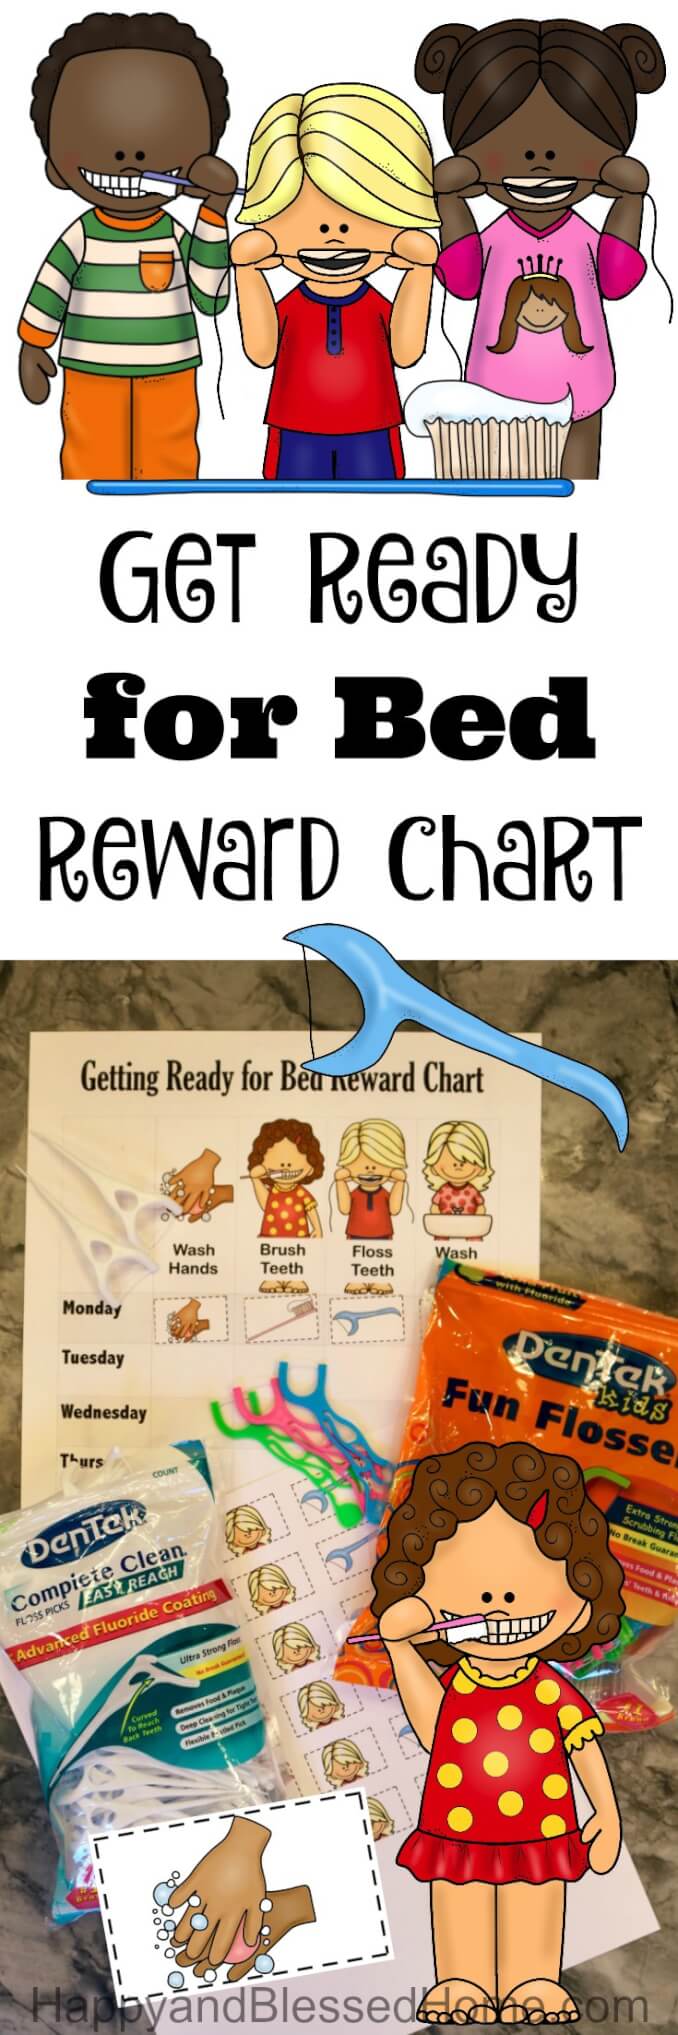 Bedtime Routine Reward Chart from HappyandBlessedHome.com